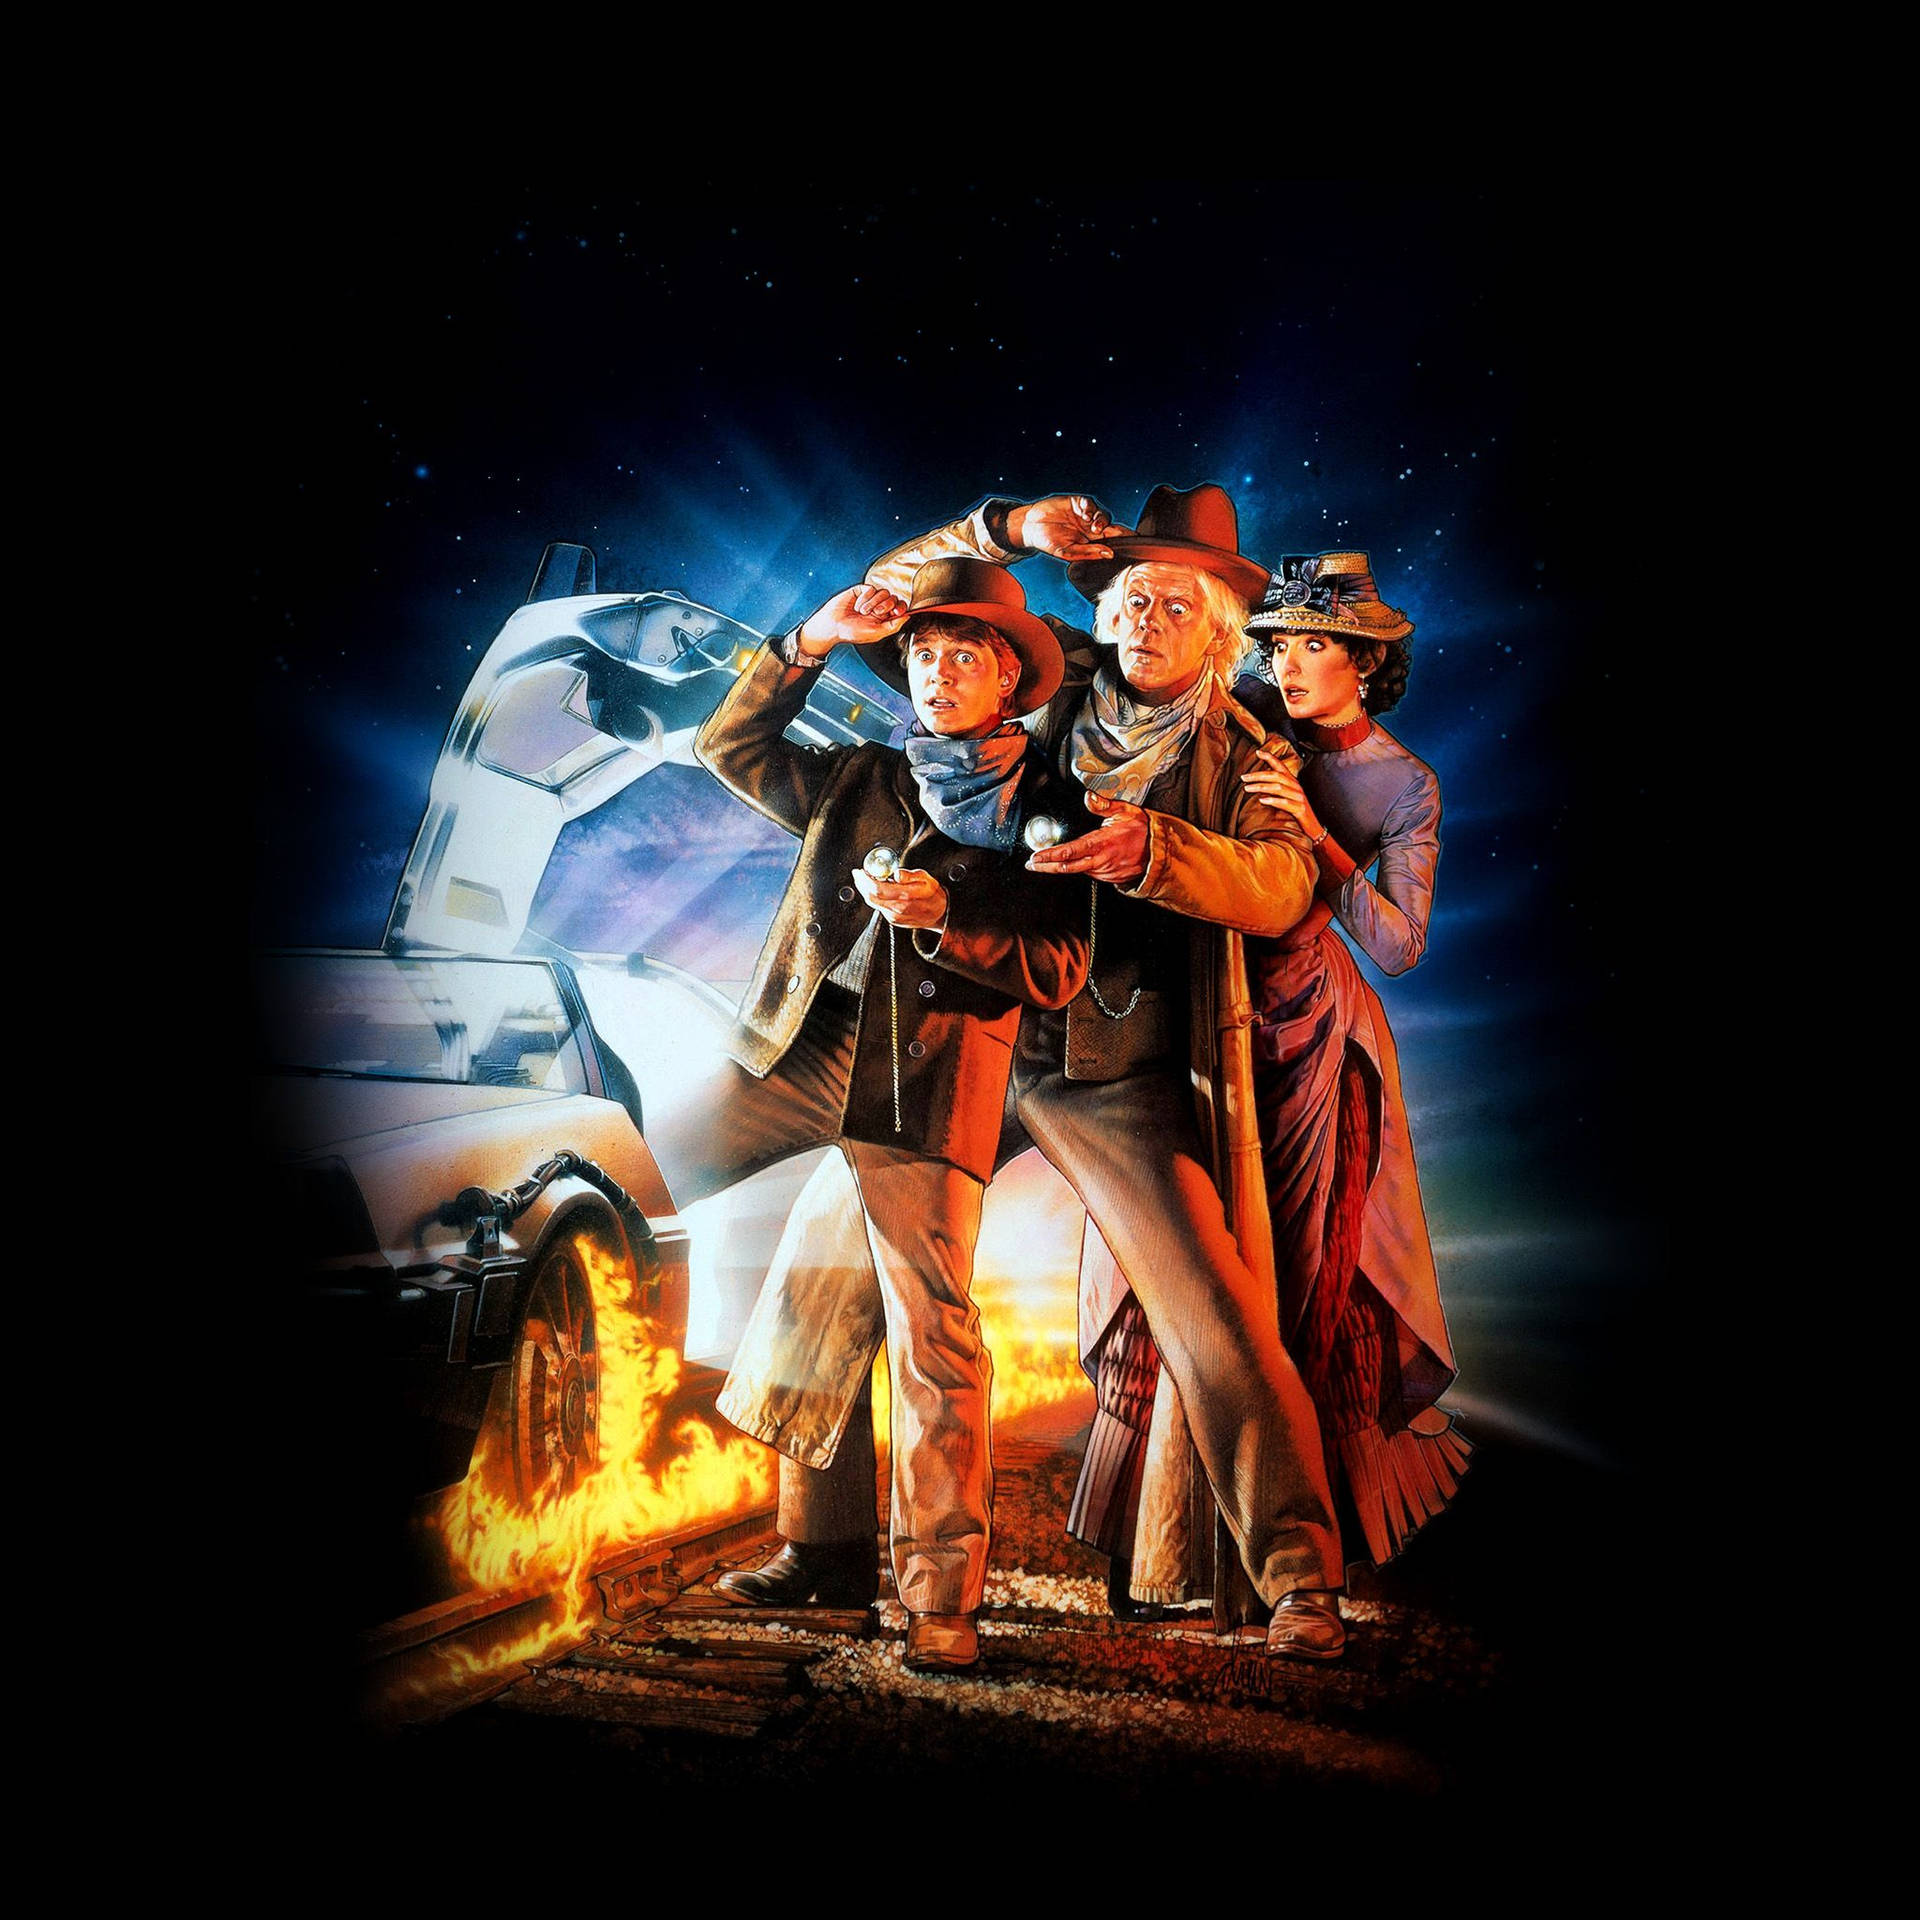 Free Back To The Future Wallpaper Downloads, Back To The Future Wallpaper for FREE